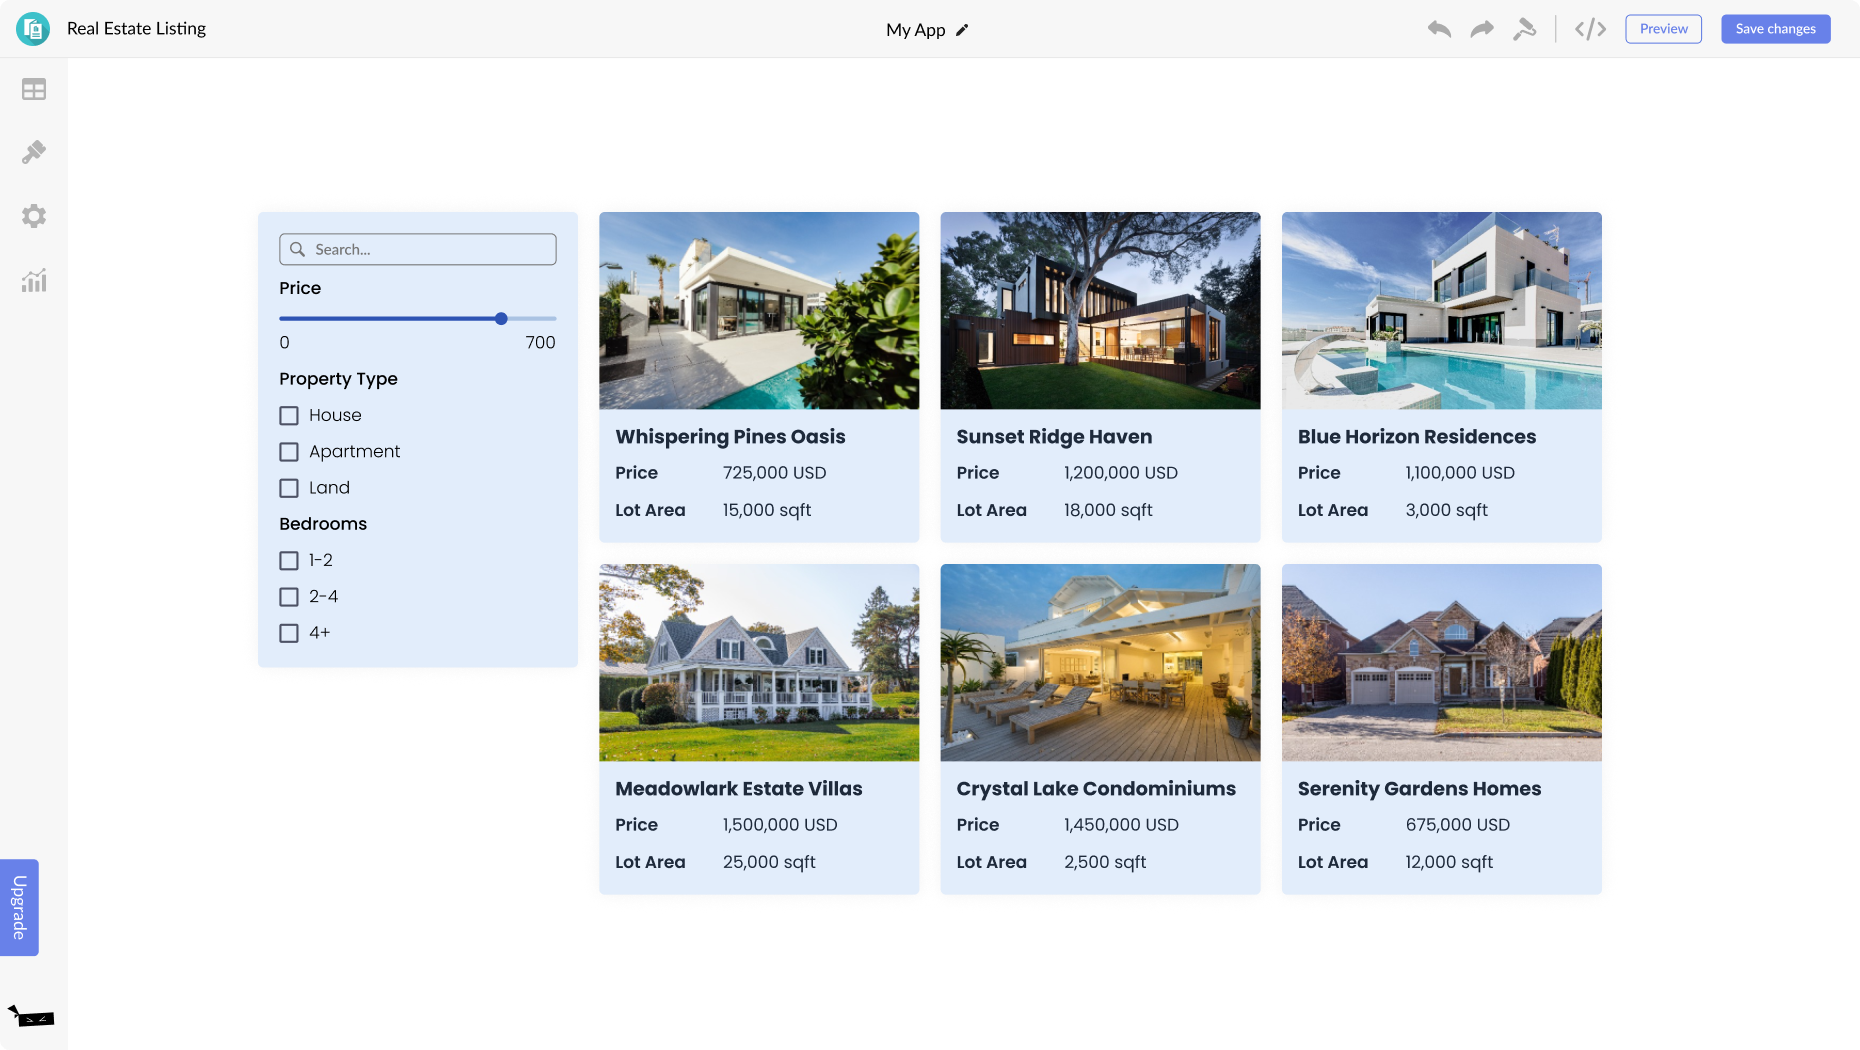 Real Estate Listings for Boxmode